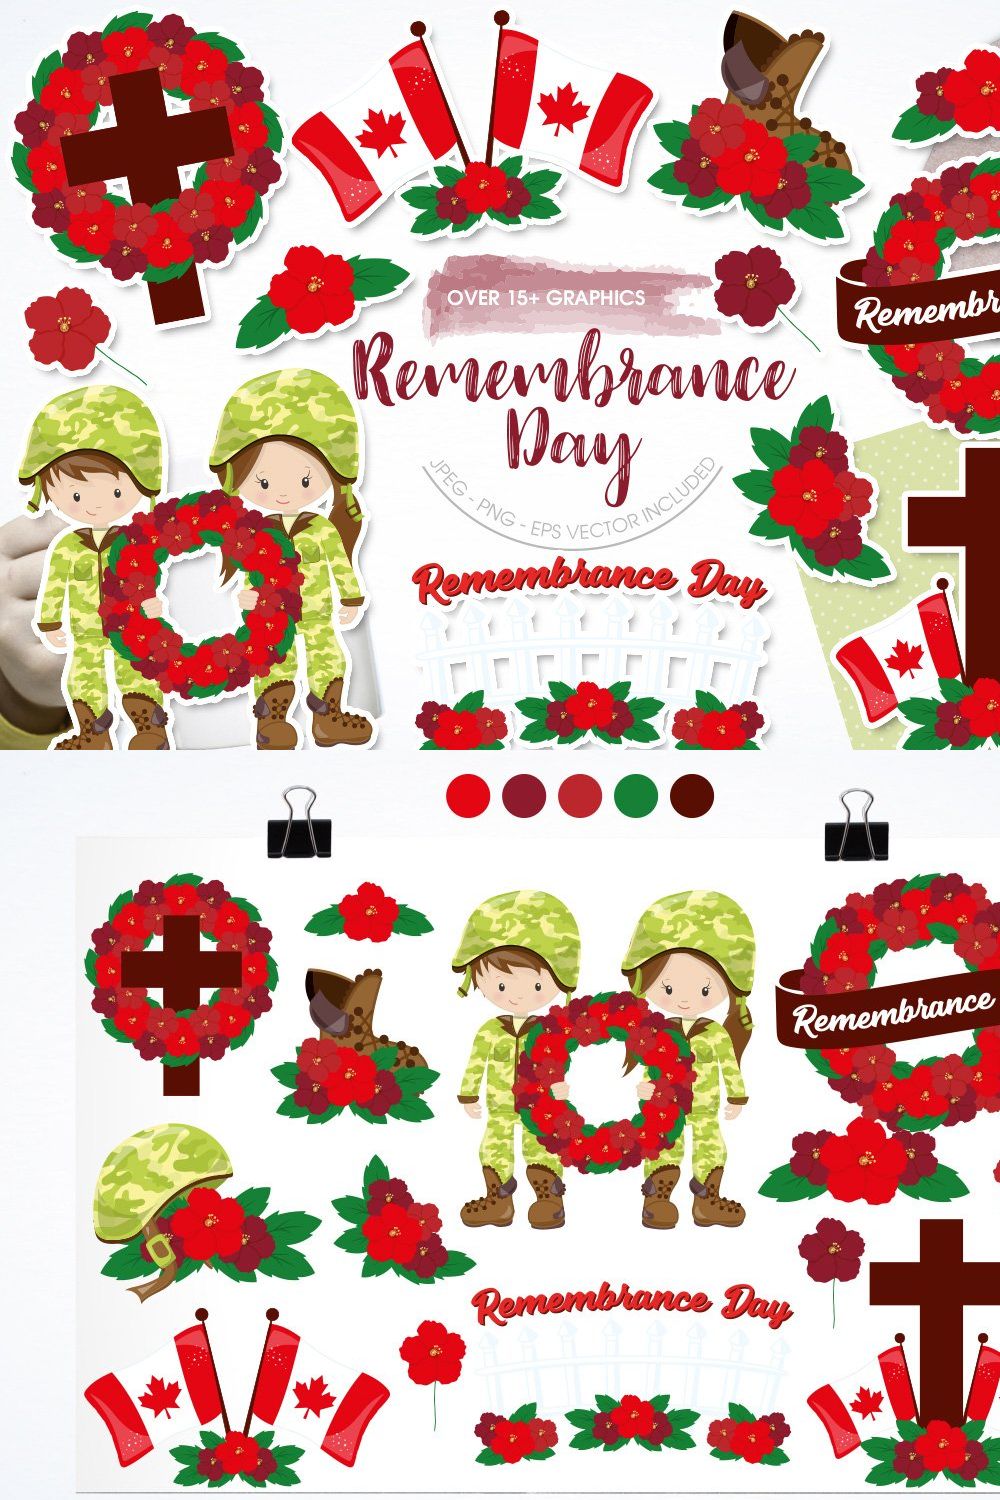 Remembrance Day pinterest preview image.